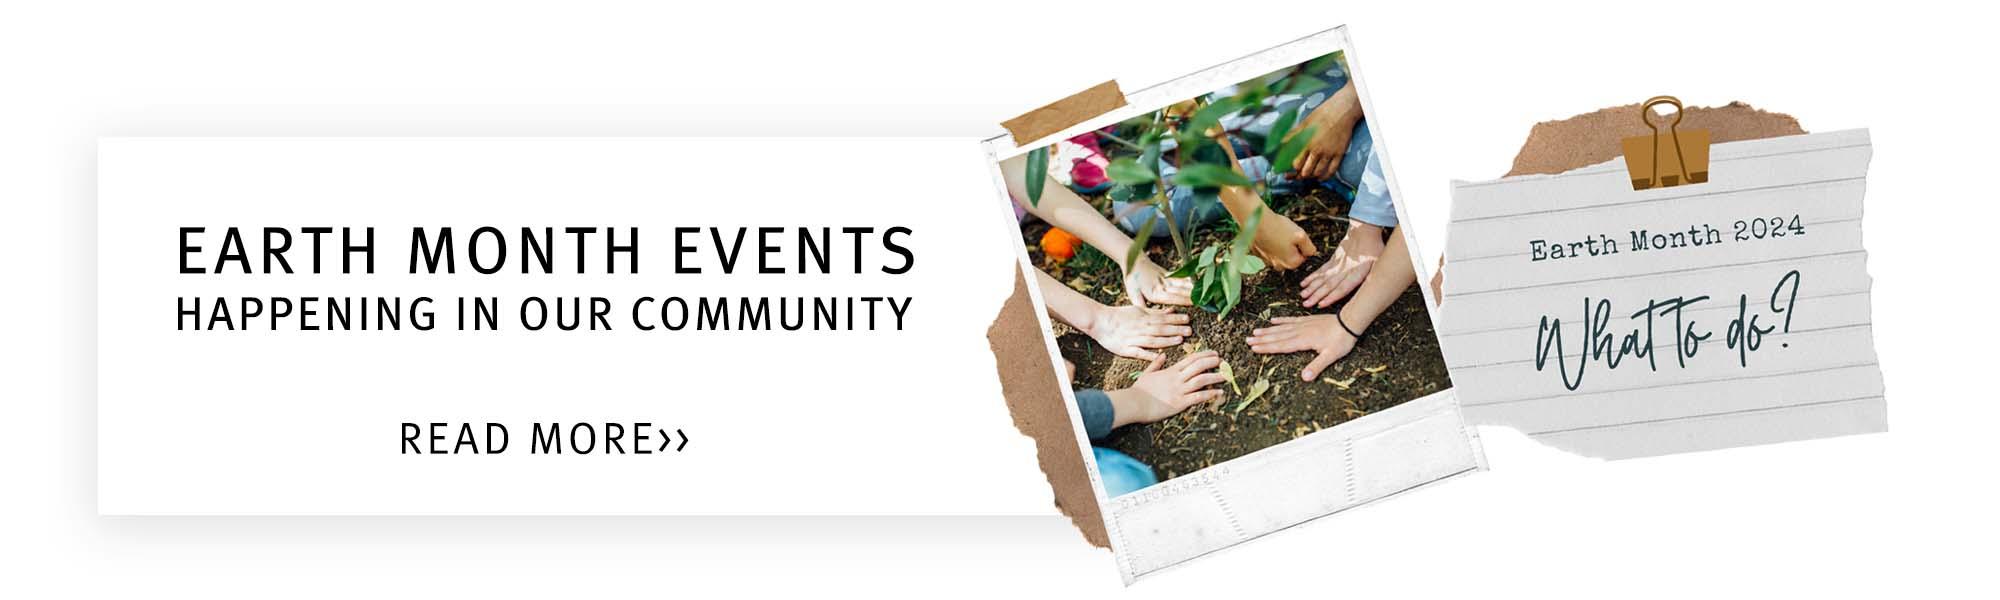 Image of earth month events in the community